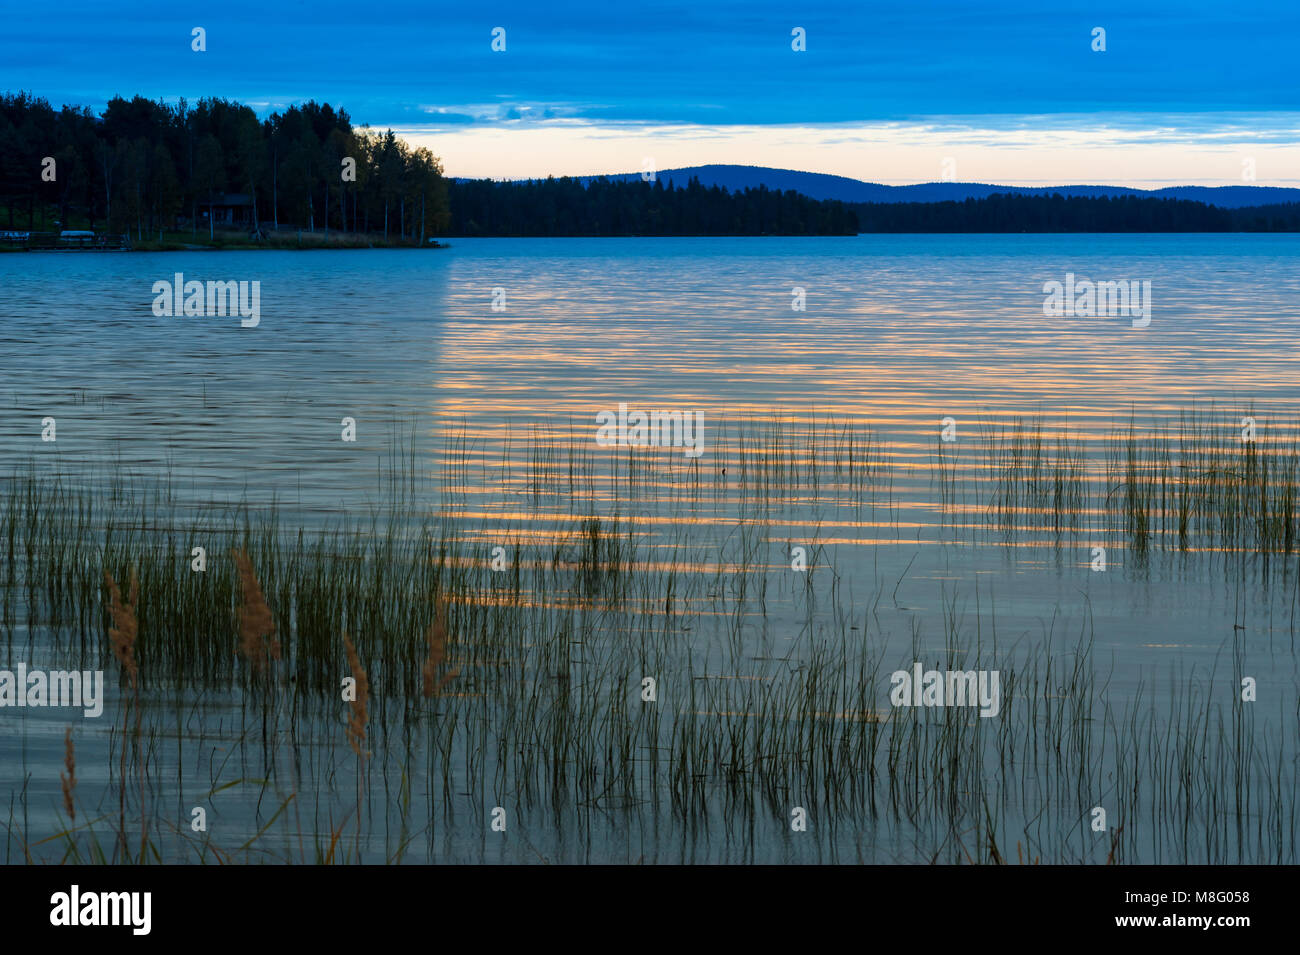 Calm placid freshwater lake at sunset with warm light on the water and pond weed plant in the front Stock Photo